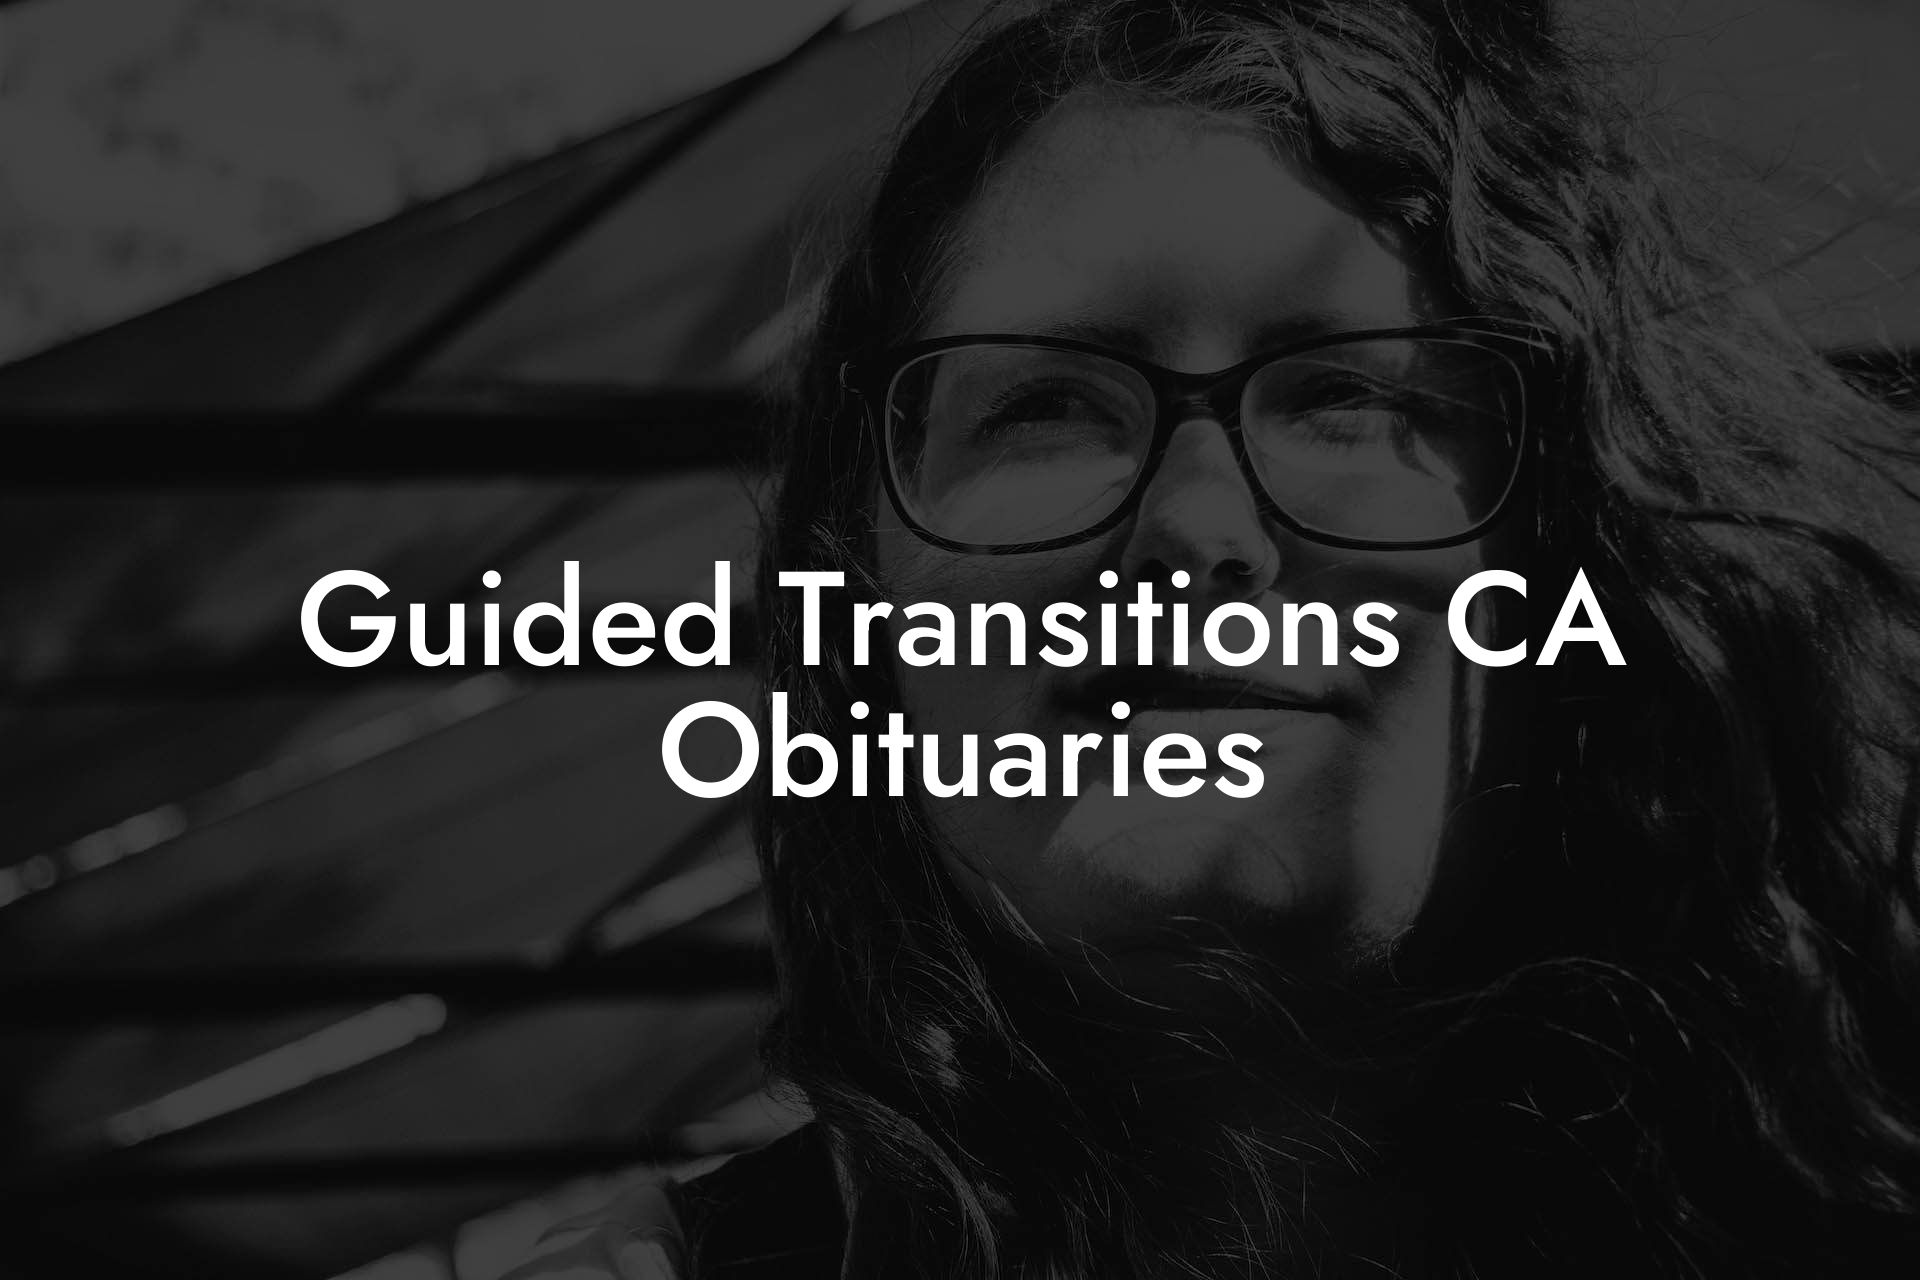 Guided Transitions CA Obituaries